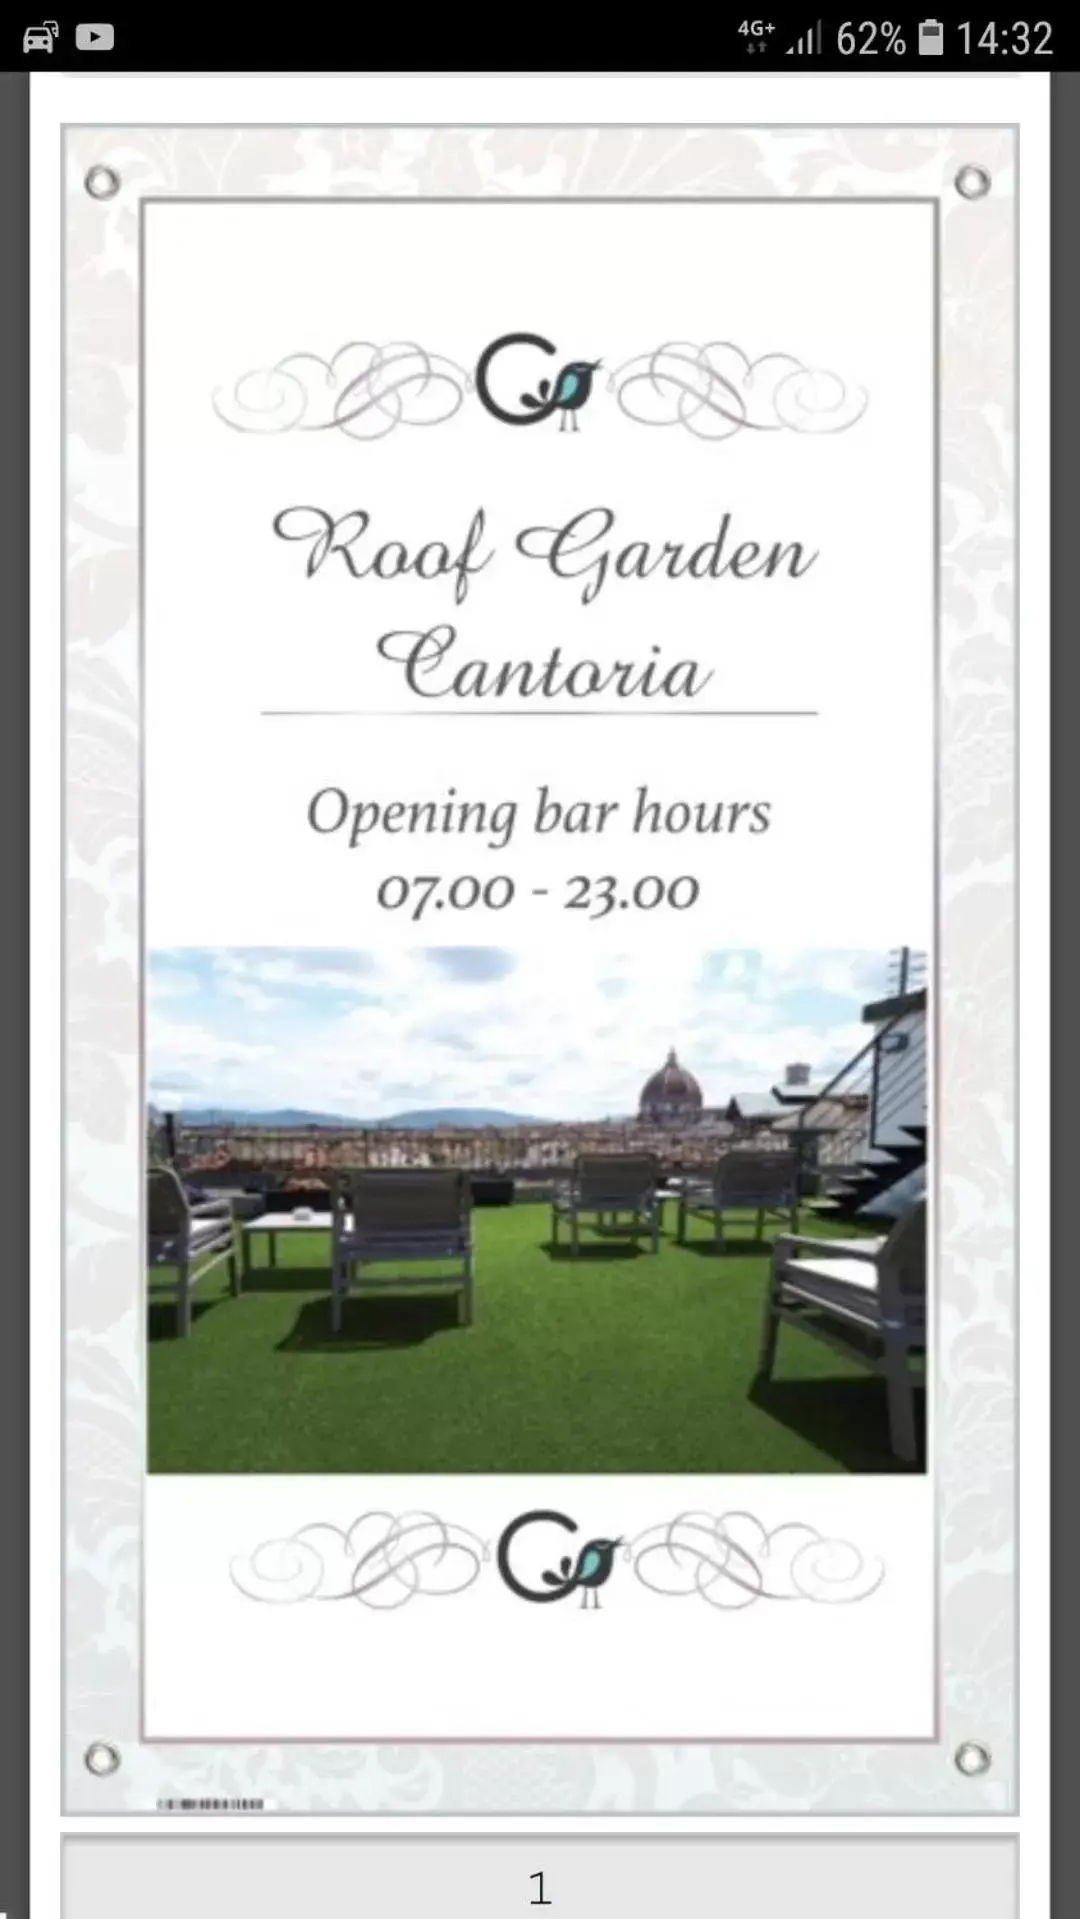 Lounge or bar in Hotel Cantoria